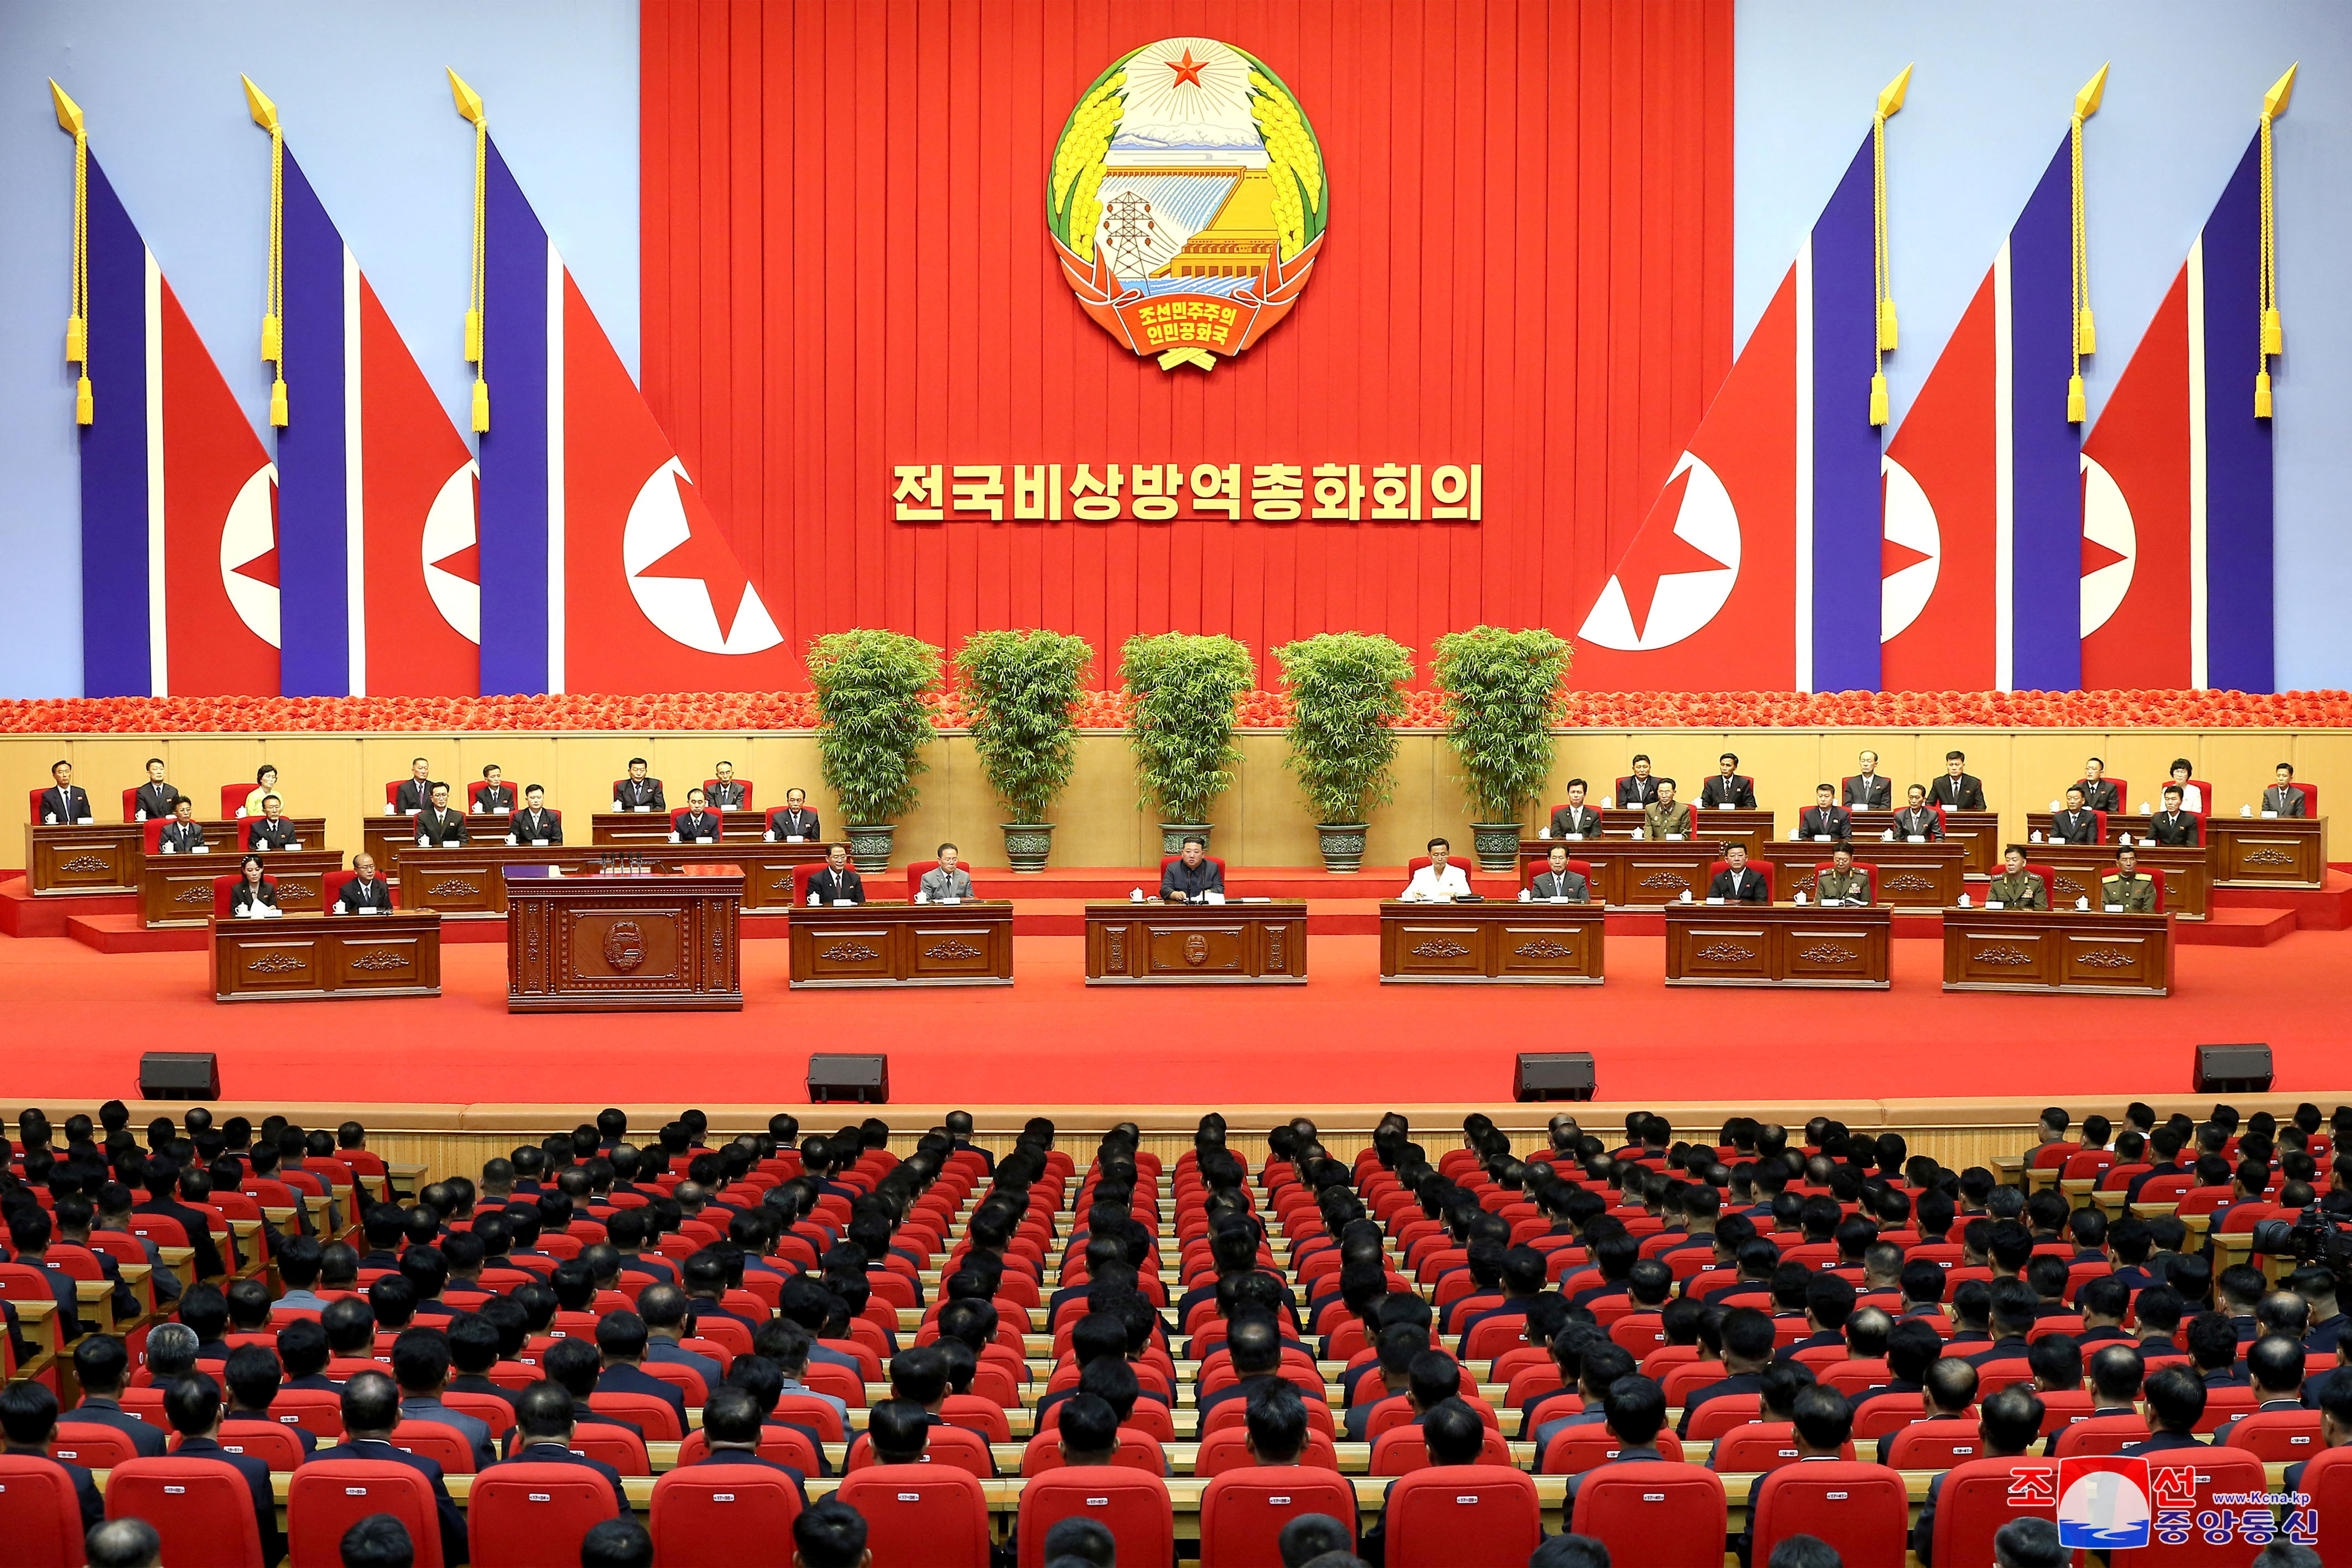 North Korean officials attend a national meeting on measures against the coronavirus disease (COVID-19) in Pyongyang